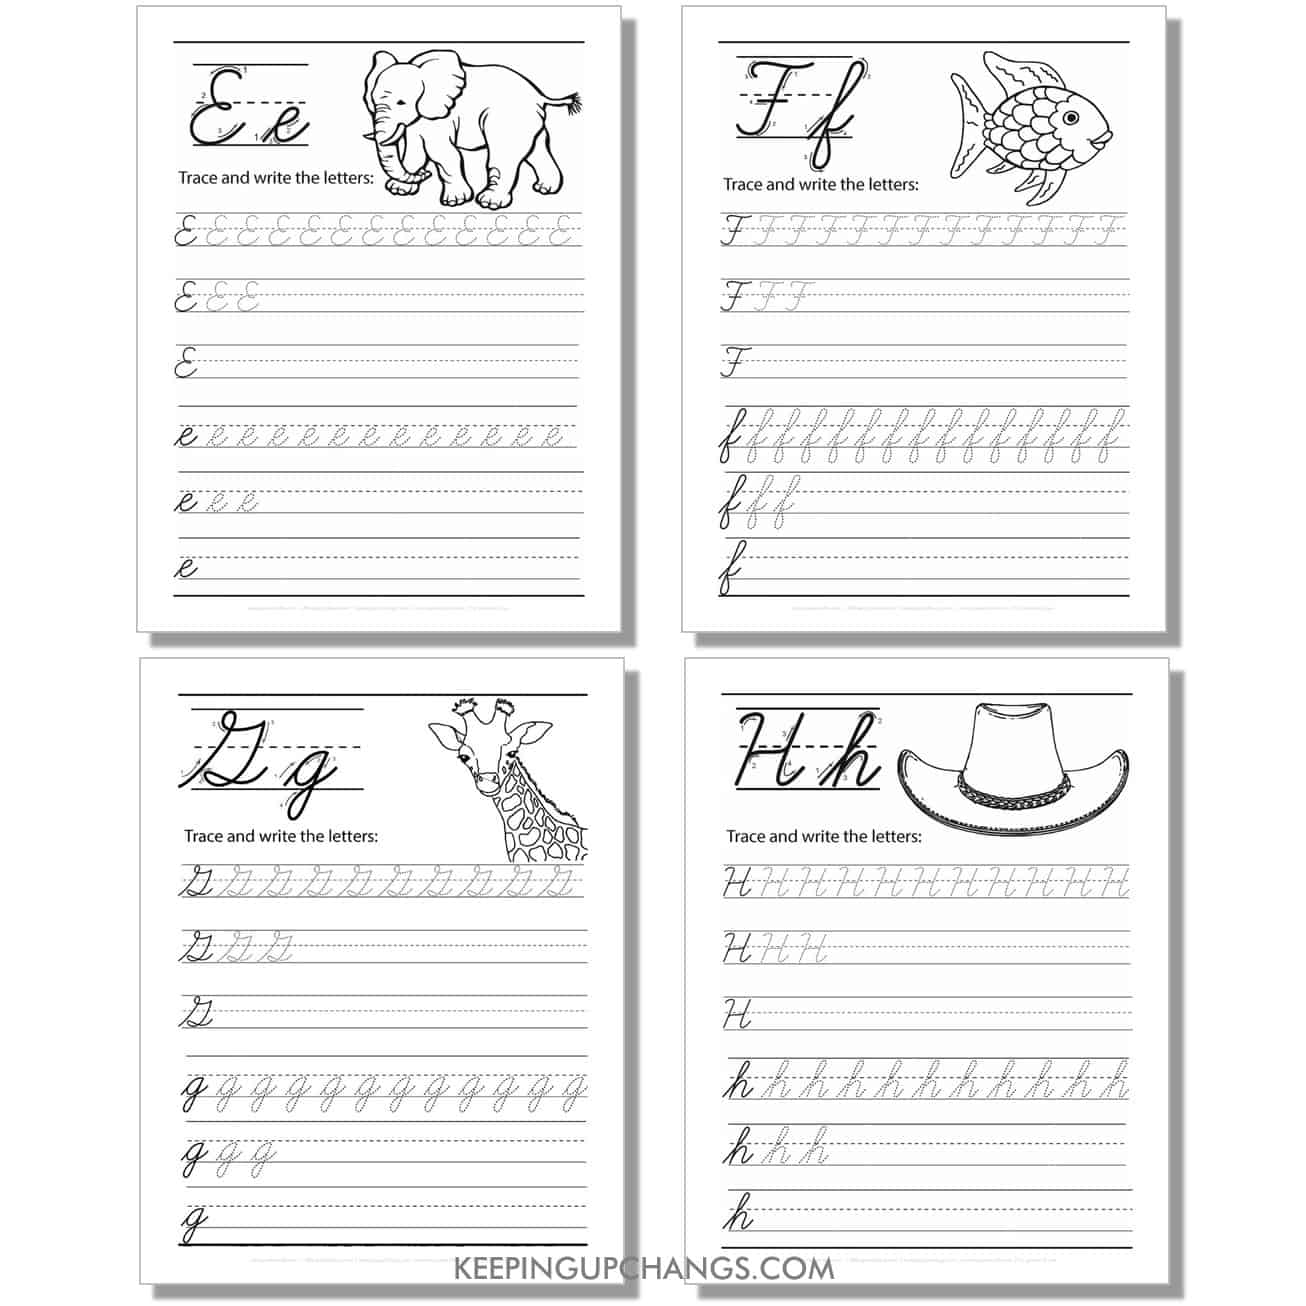 cursive worksheet with uppercase, lowercase letters for e, f, g, h.